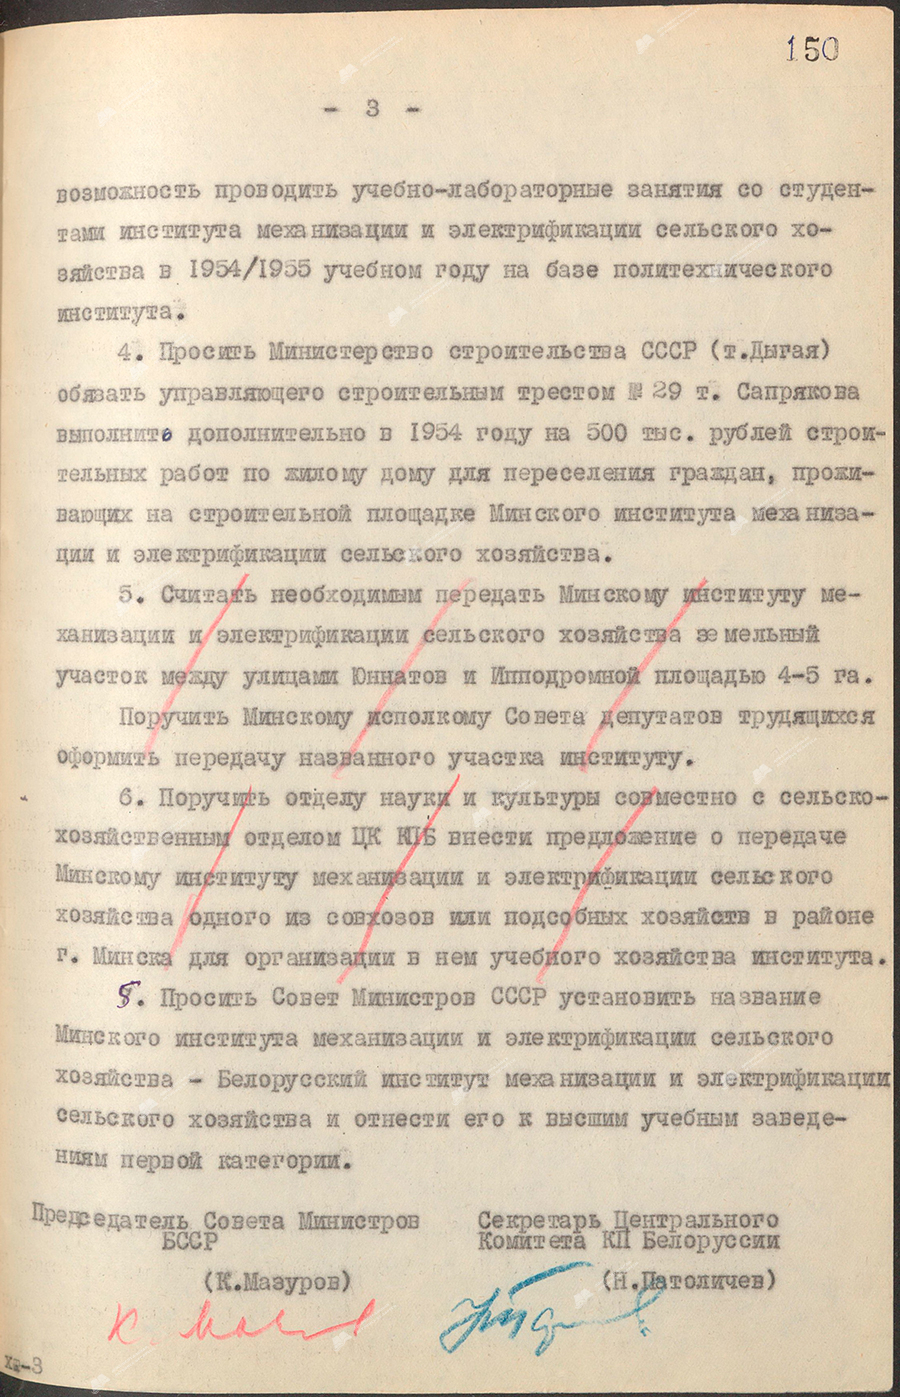 Resolution No. 638 of the Council of Ministers of the Byelorussian SSR and the Central Committee of the Communist Party of Belarus «On the opening of classes at the Minsk Institute of Mechanization and Electrification of Agriculture»-стр. 2